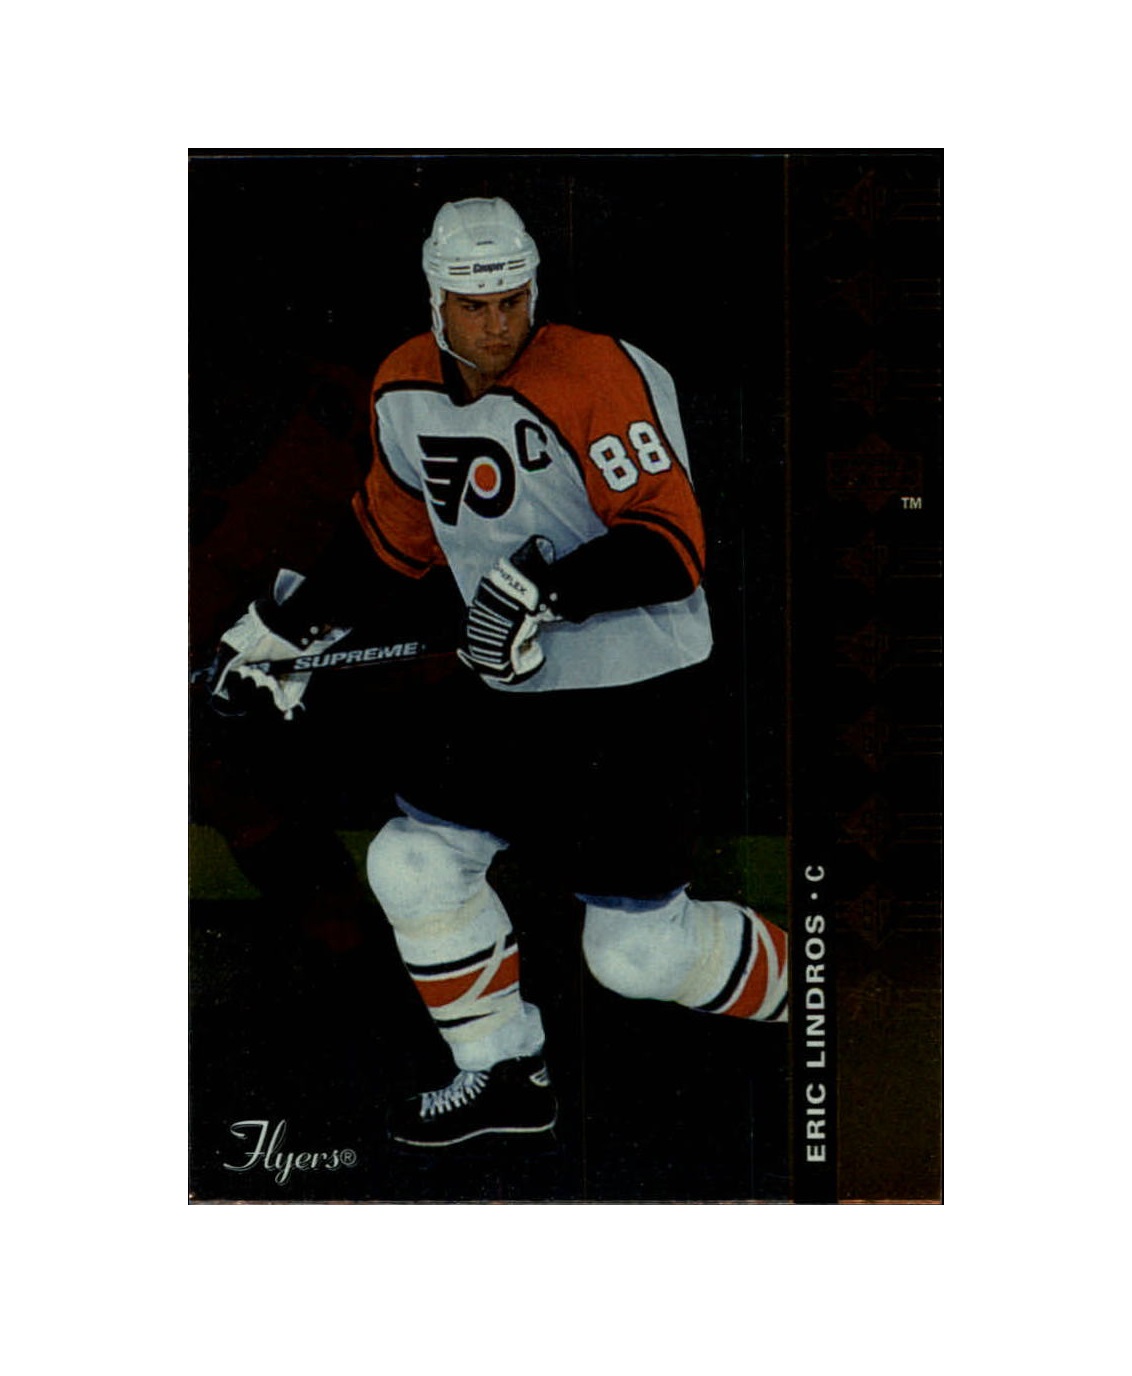 1994-95 Upper Deck SP Inserts #SP149 Eric Lindros (10-X189-FLYERS)